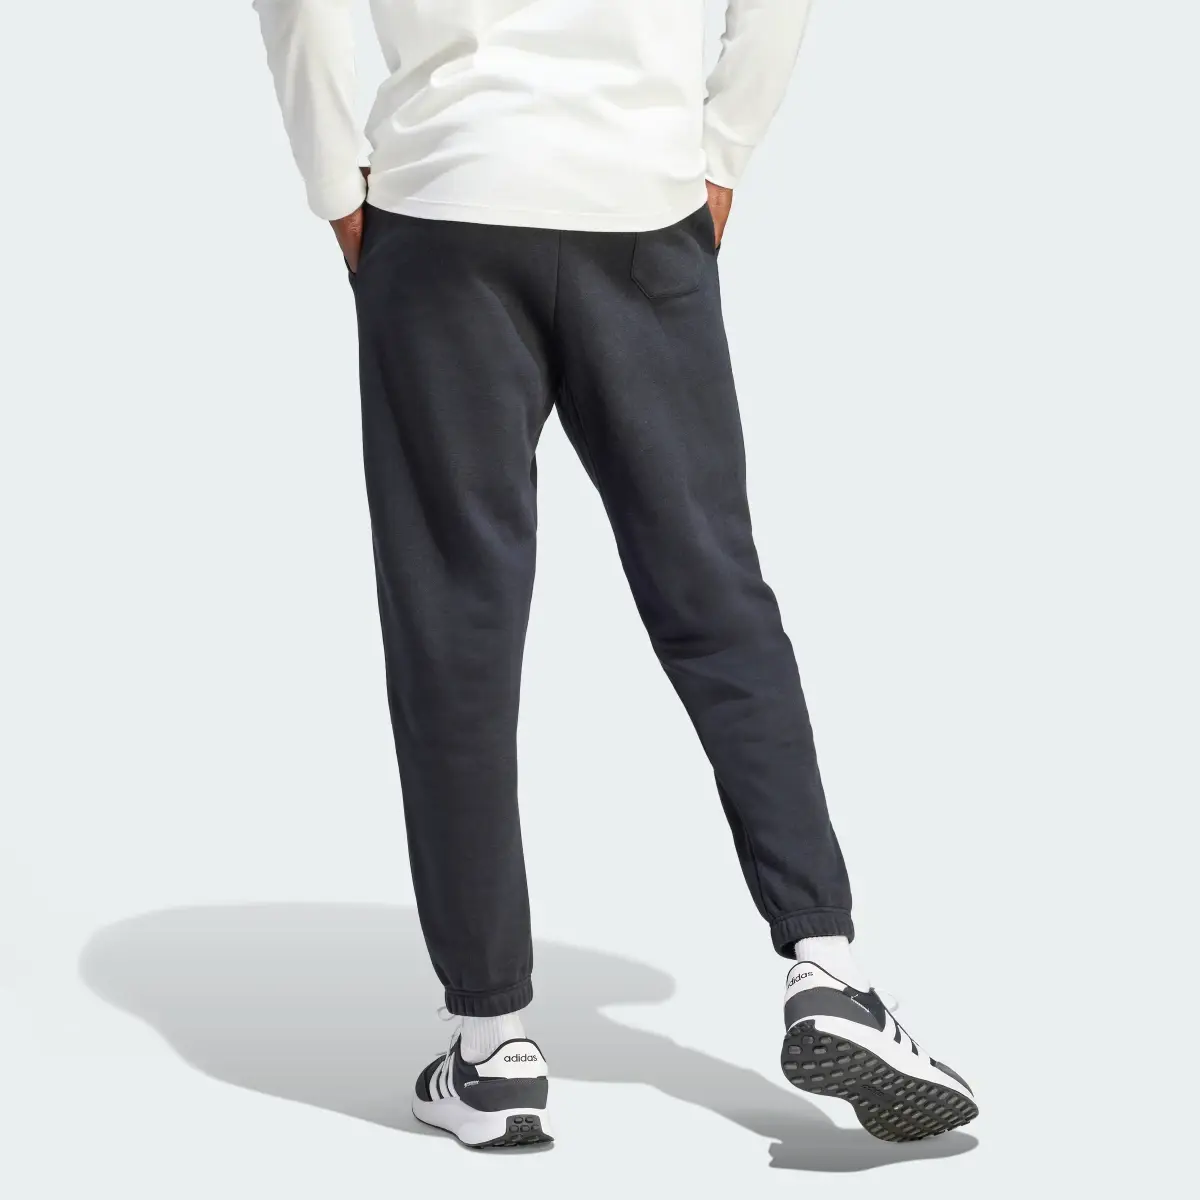 Adidas The Safe Place Joggers. 2